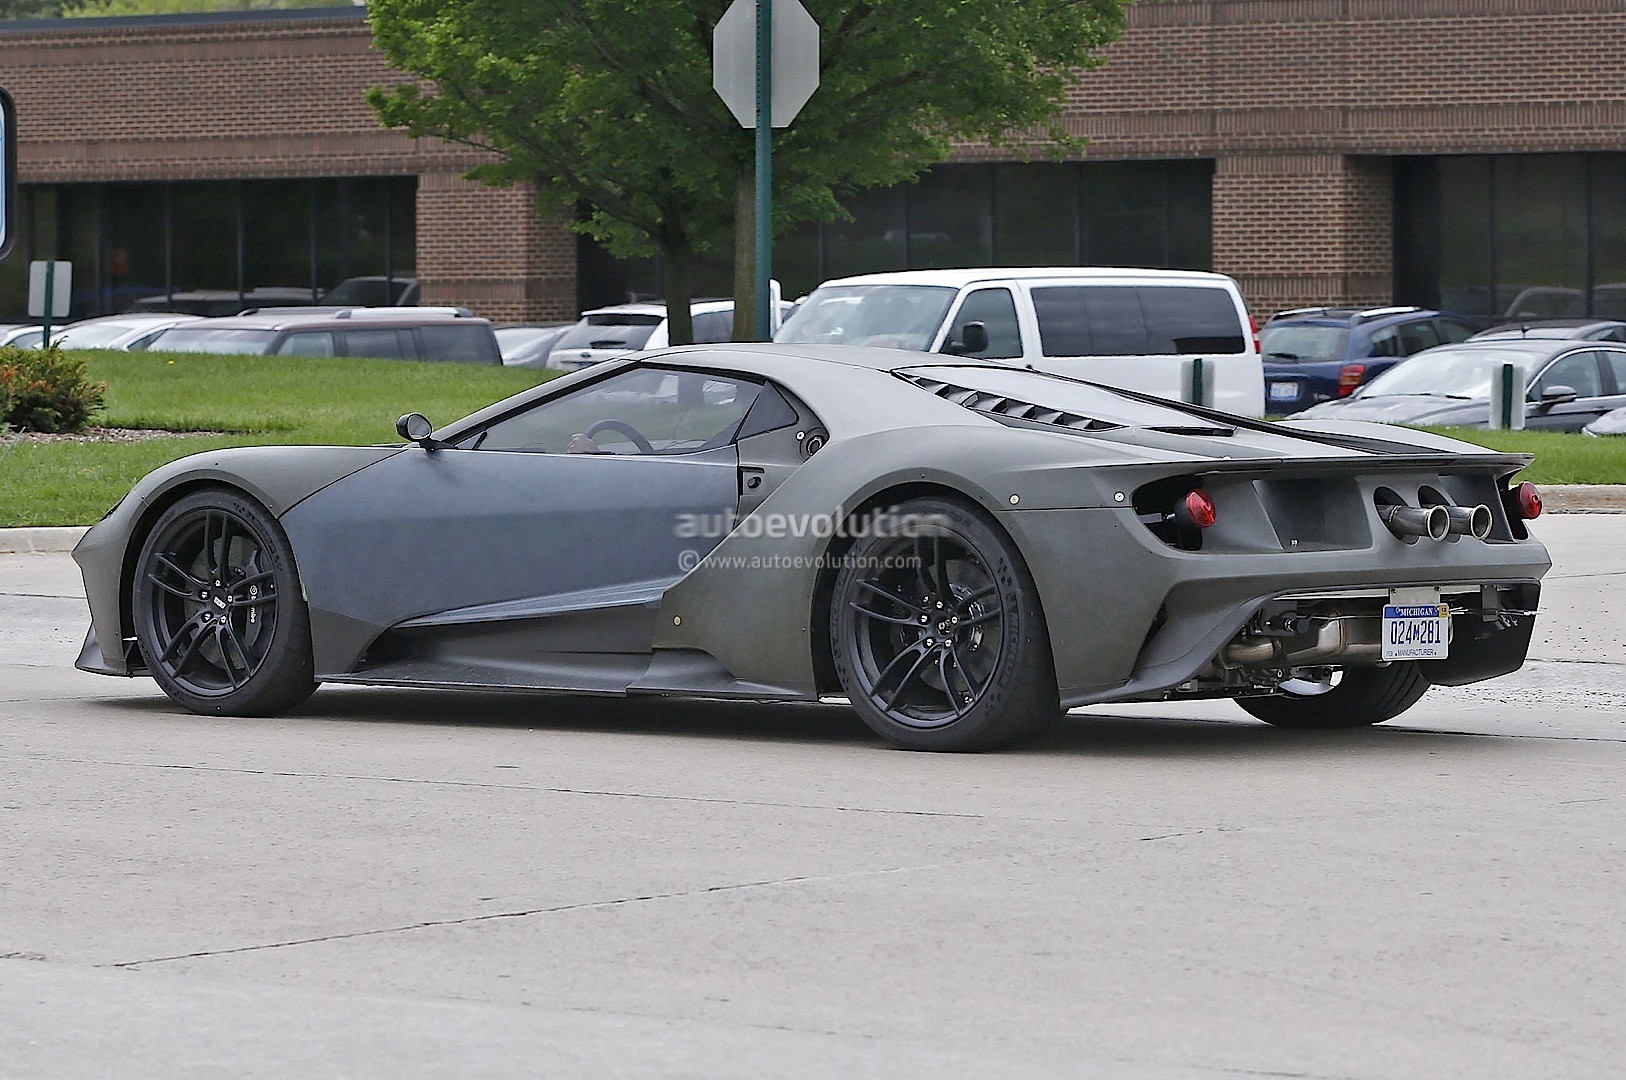 2017-ford-gt-test-mule-spied-looks-apocalyptic-sans-paint-photo-gallery_8.jpg